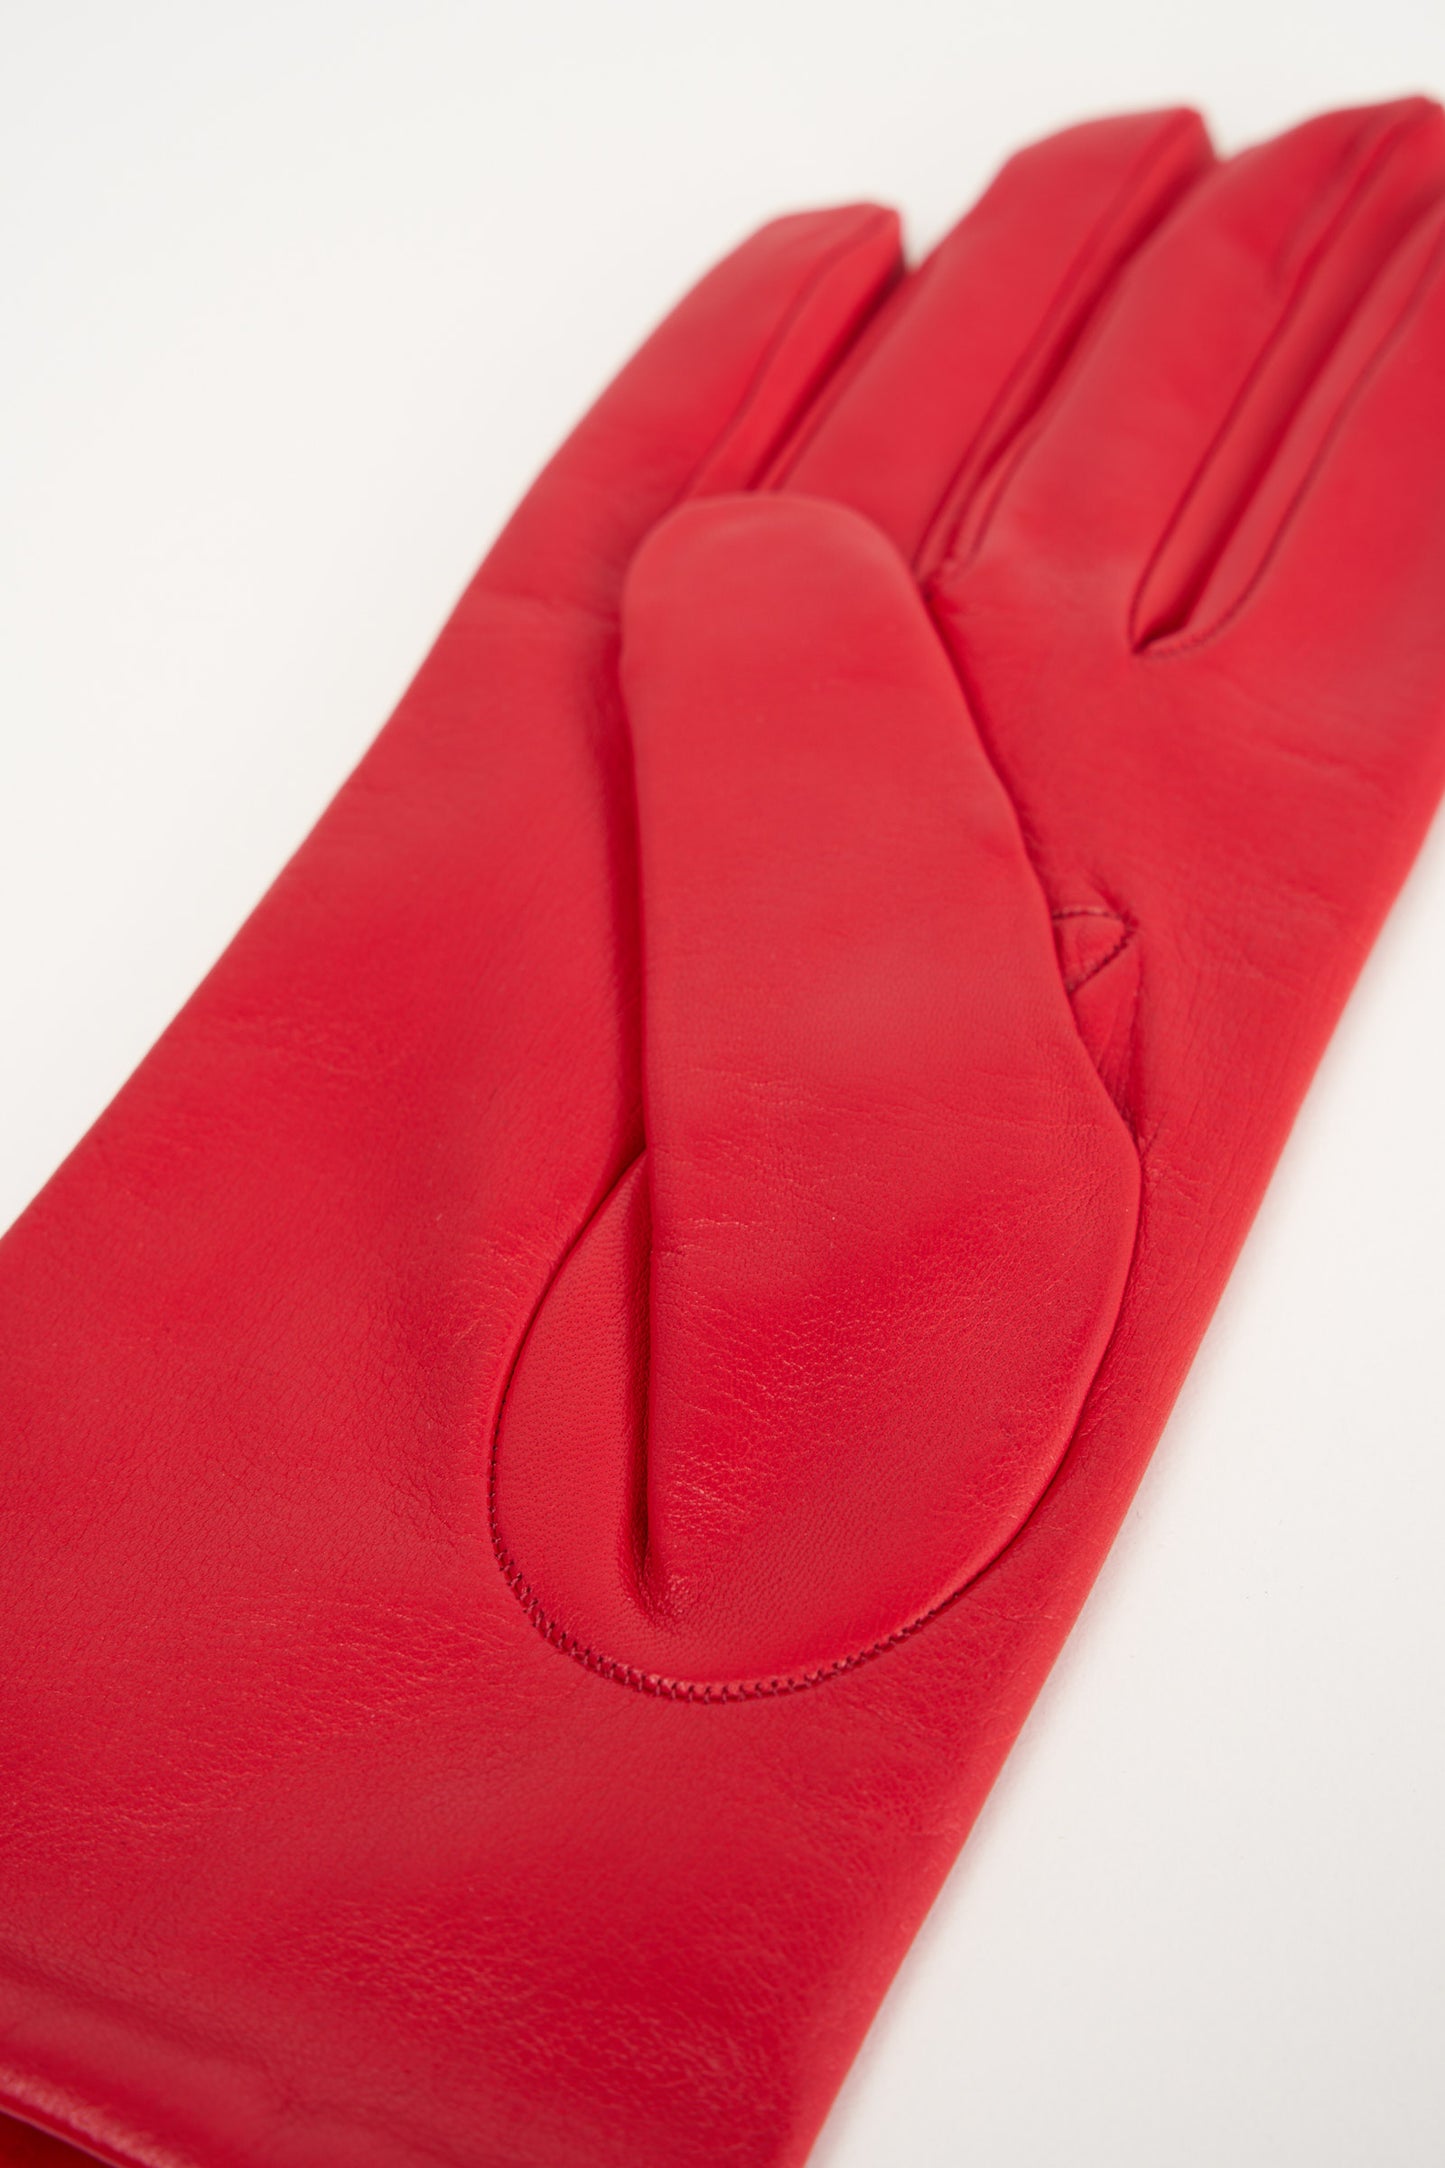  Alpo Short Red Gloves For Women Rosso Donna - 2